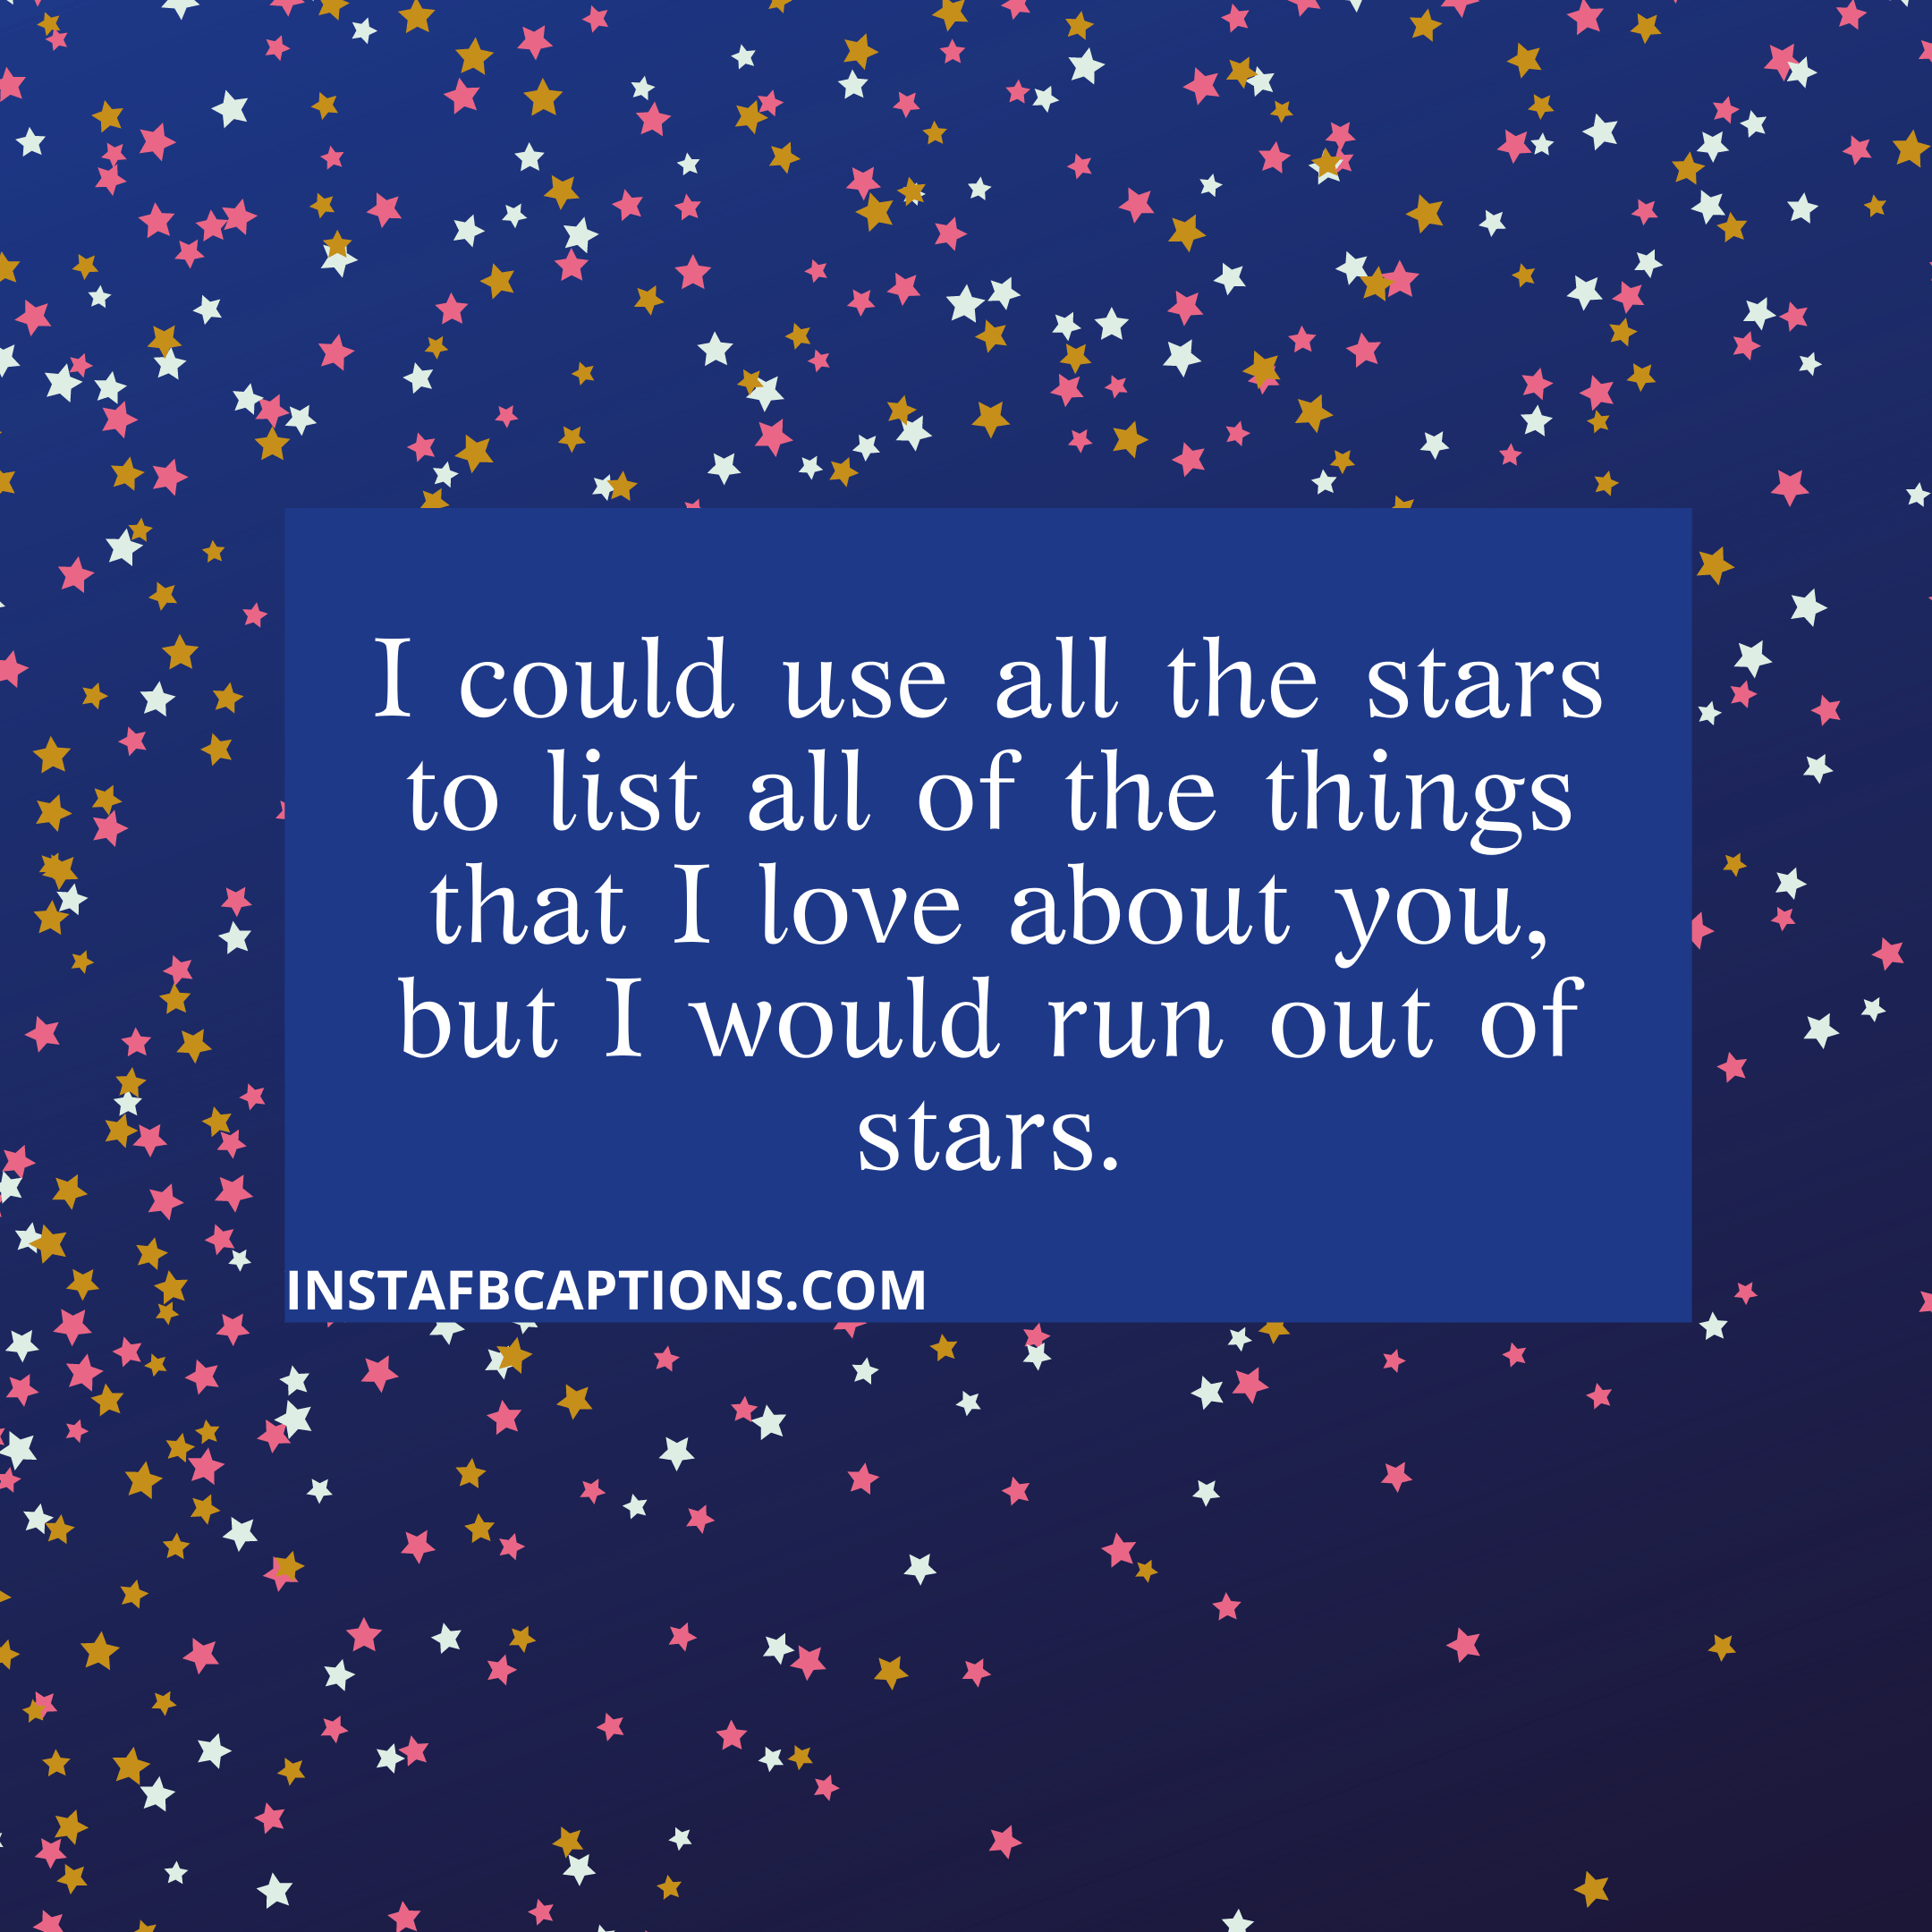 I Could Use All The Stars To List All Of The Things That I Love About You, But I Would Run Out Of Stars  - I could use all the stars to list all of the things that I love about you but I would run out of stars - 200+ COMMENTS For COUPLE PICS on Instagram  2022